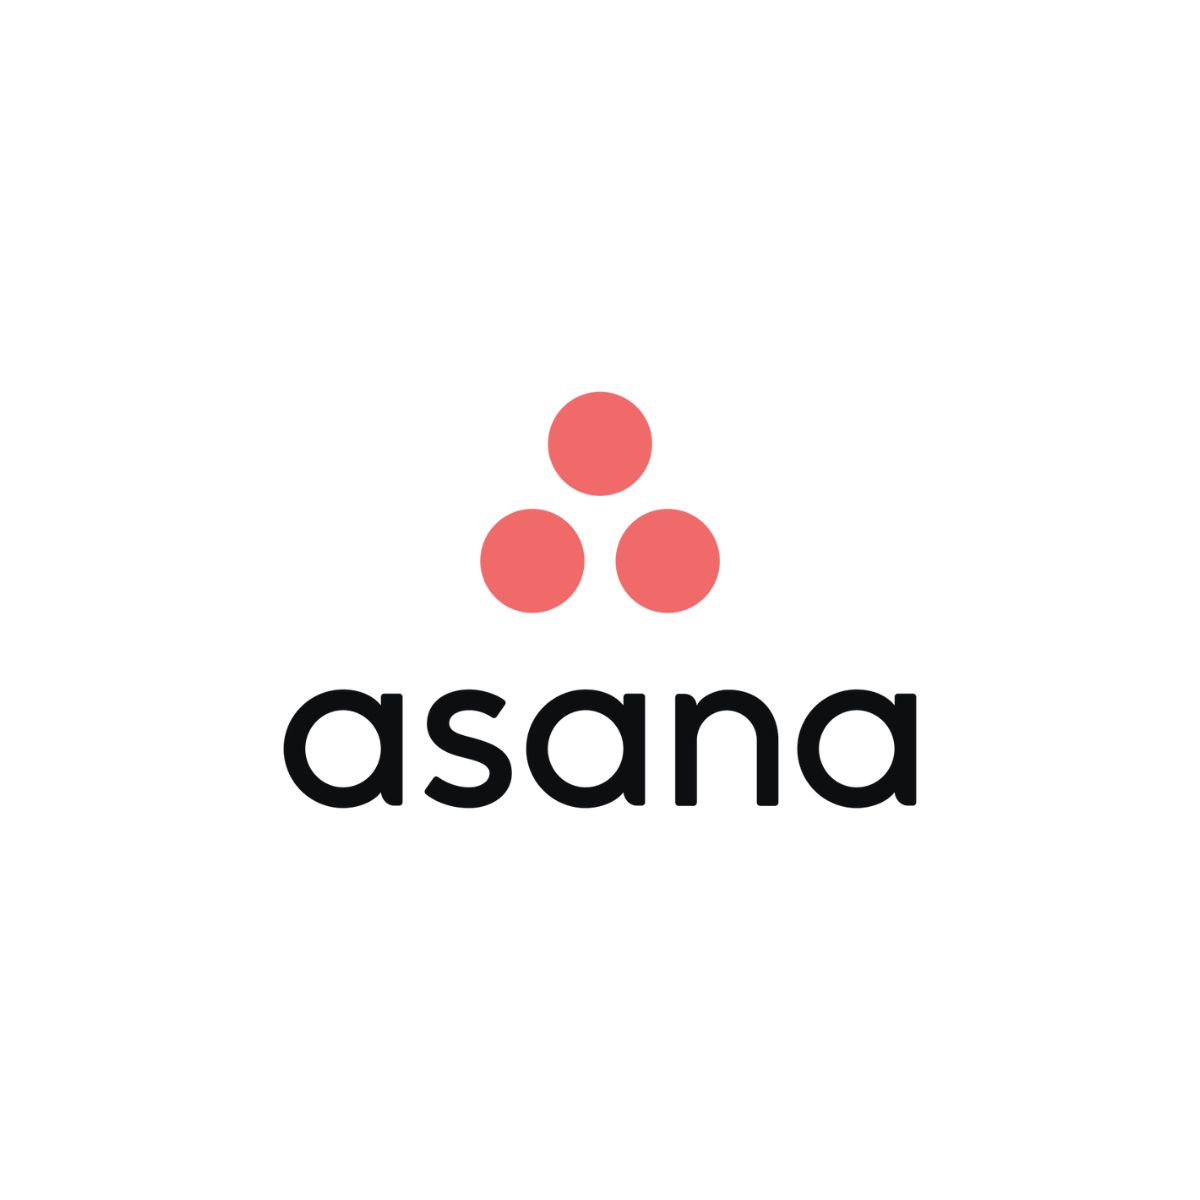 What Are Seats In Asana